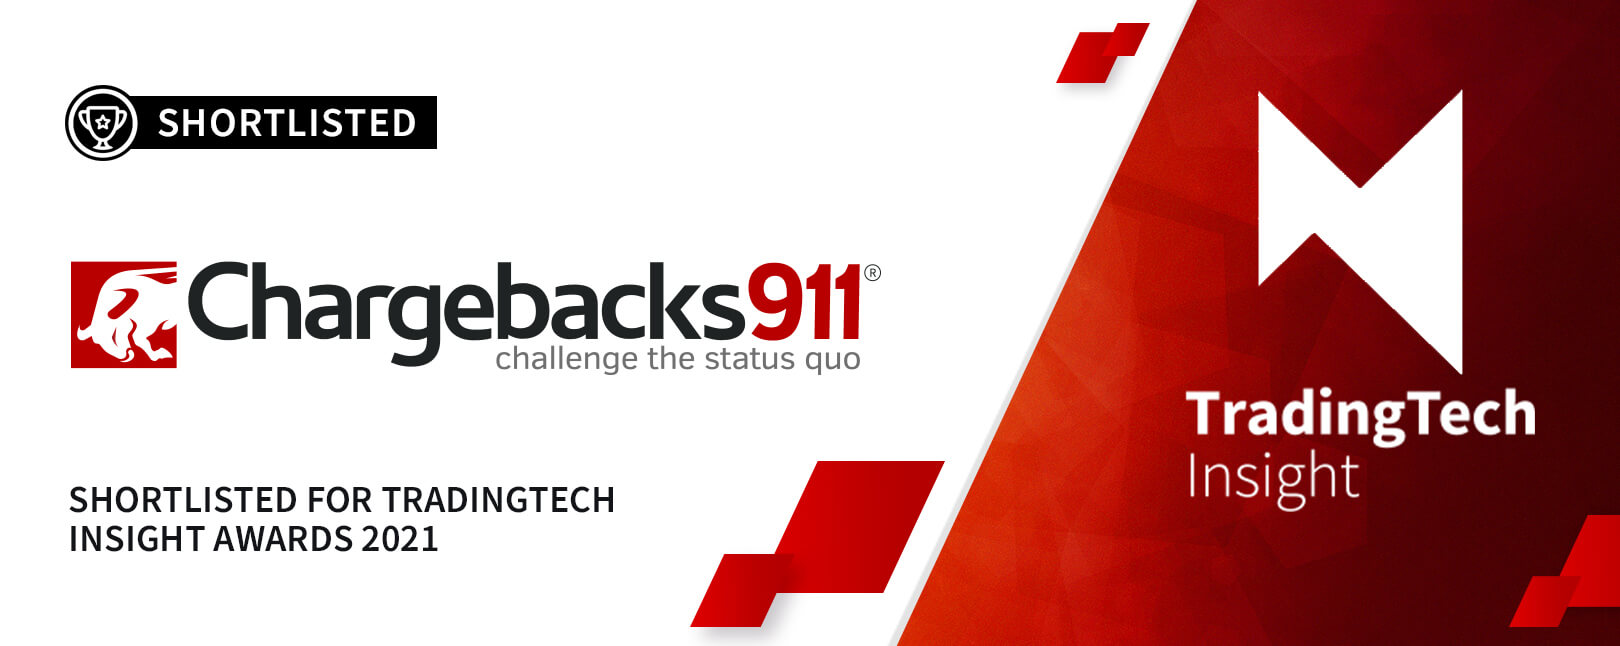 Chargebacks911® Shortlisted for TradingTech Insight Awards 2021